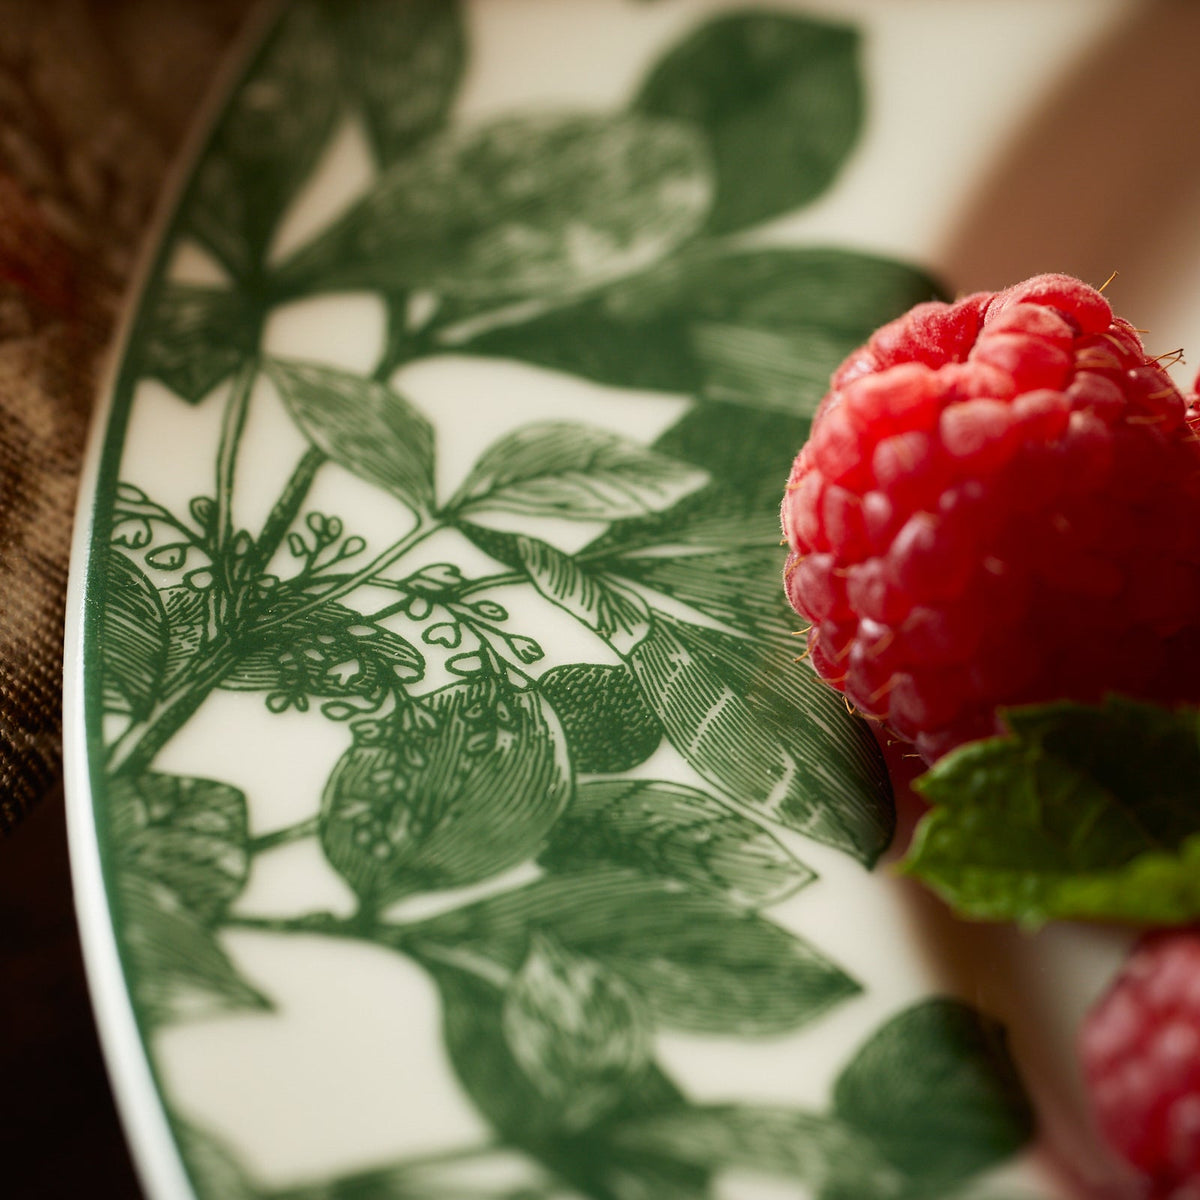 Close-up of a premium porcelain Arbor Green Rimmed Salad Plate by Caskata adorned with green foliage designs, featuring fresh raspberries and mint leaves on the edge.